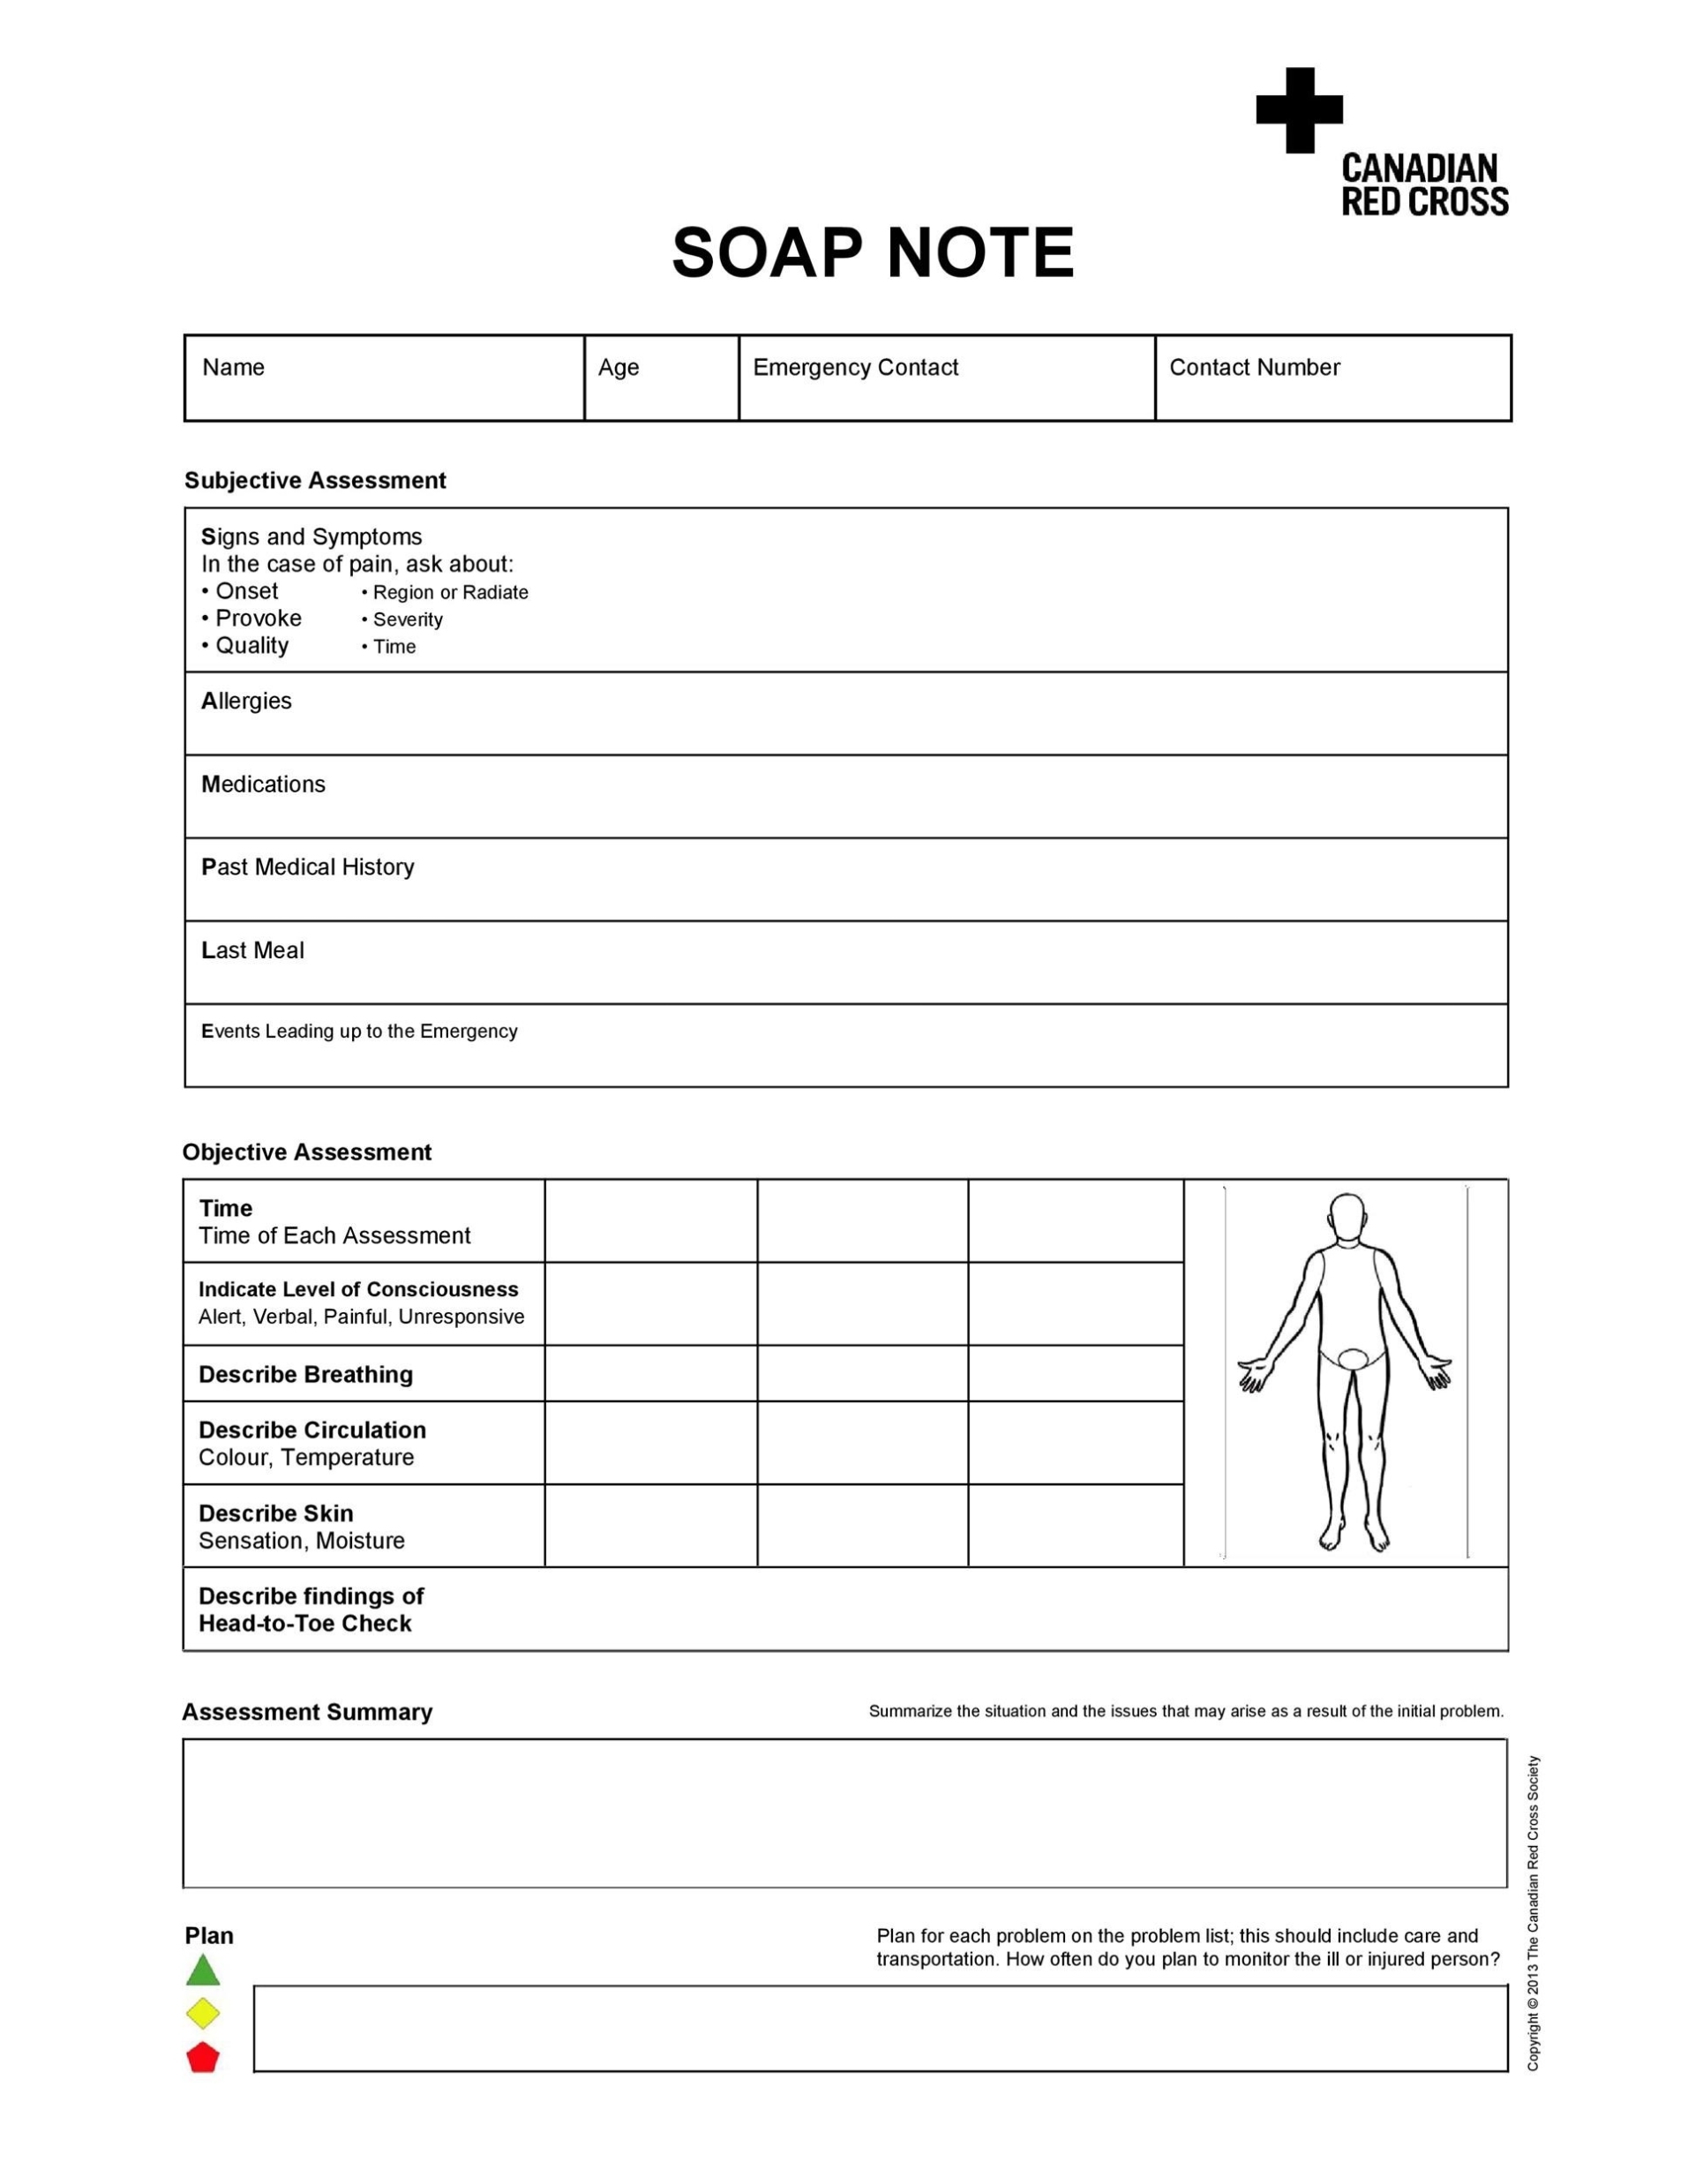 40 Fantastic Soap Note Examples & Templates - Template Lab With Free Soap Notes For Massage Therapy Templates